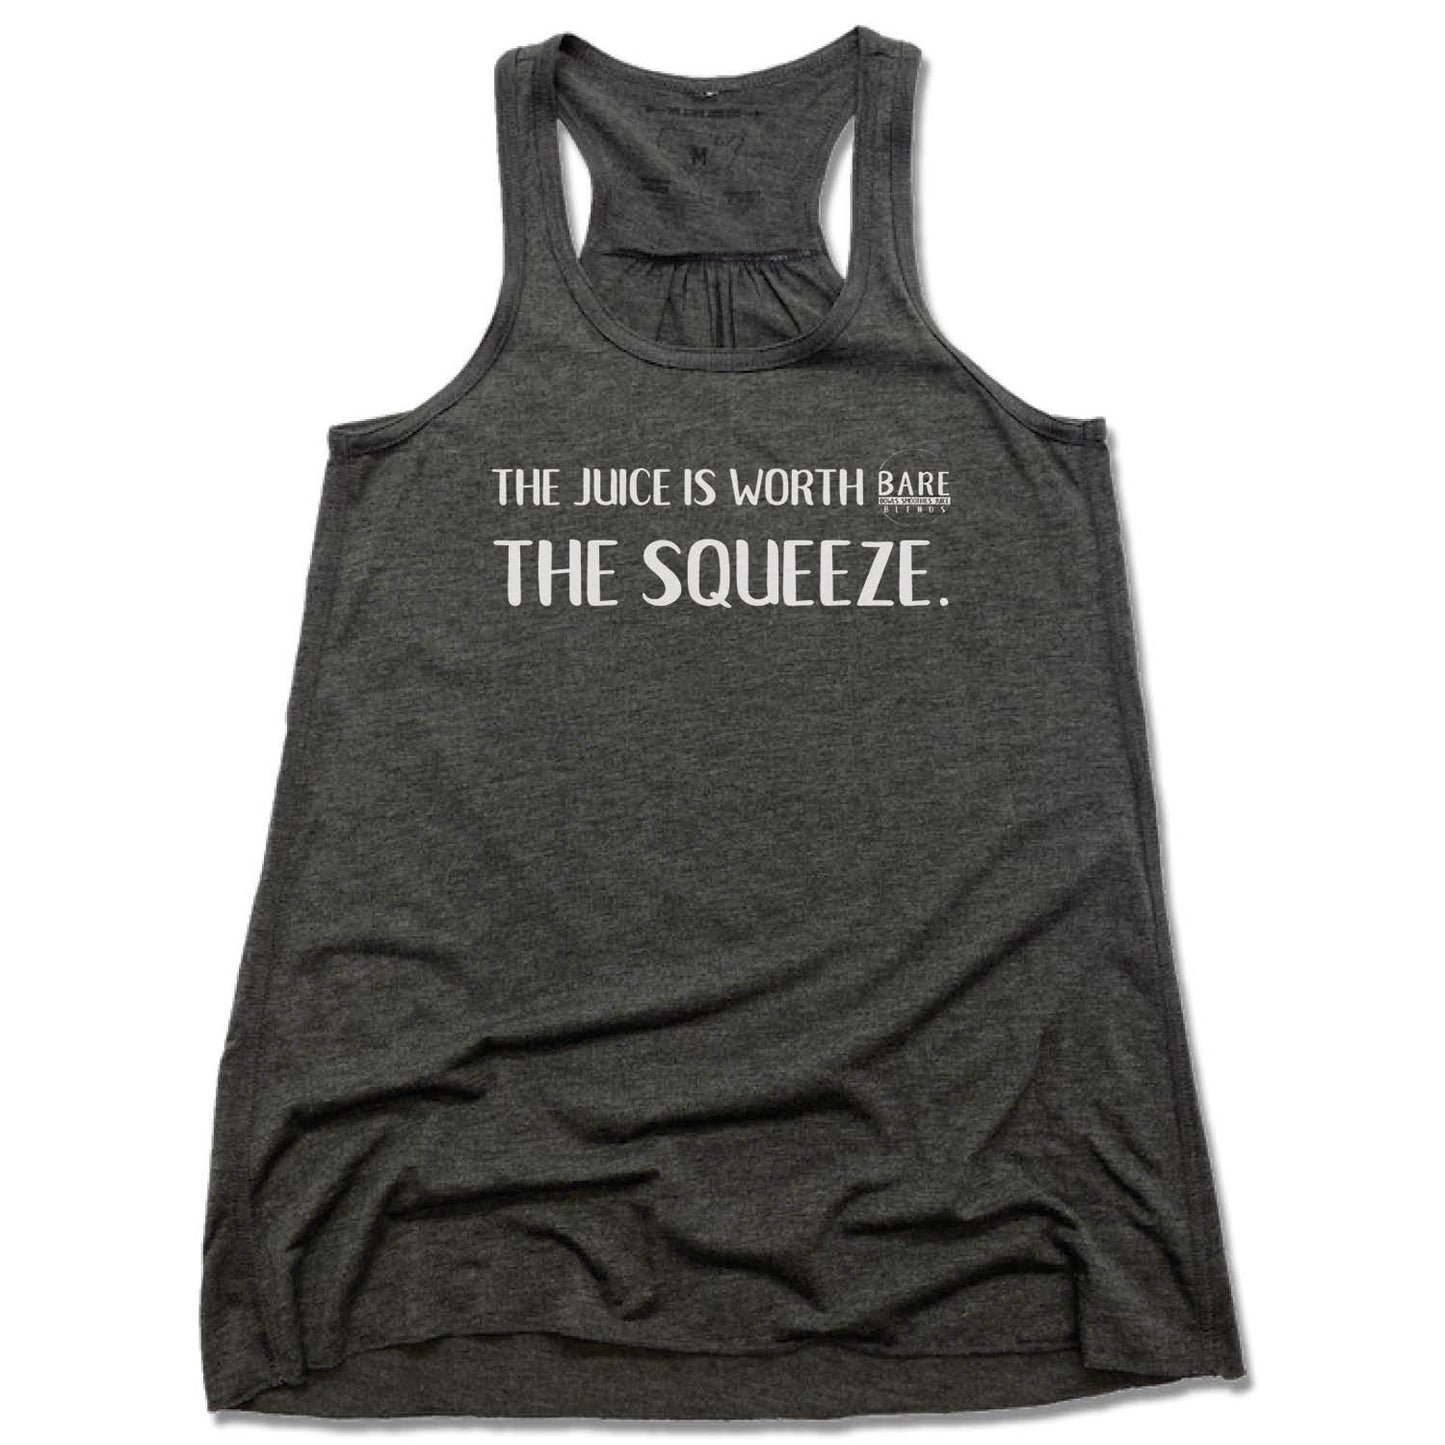 BARE BLENDS | LADIES GRAY FLOWY TANK | THE SQUEEZE WHITE LOGO